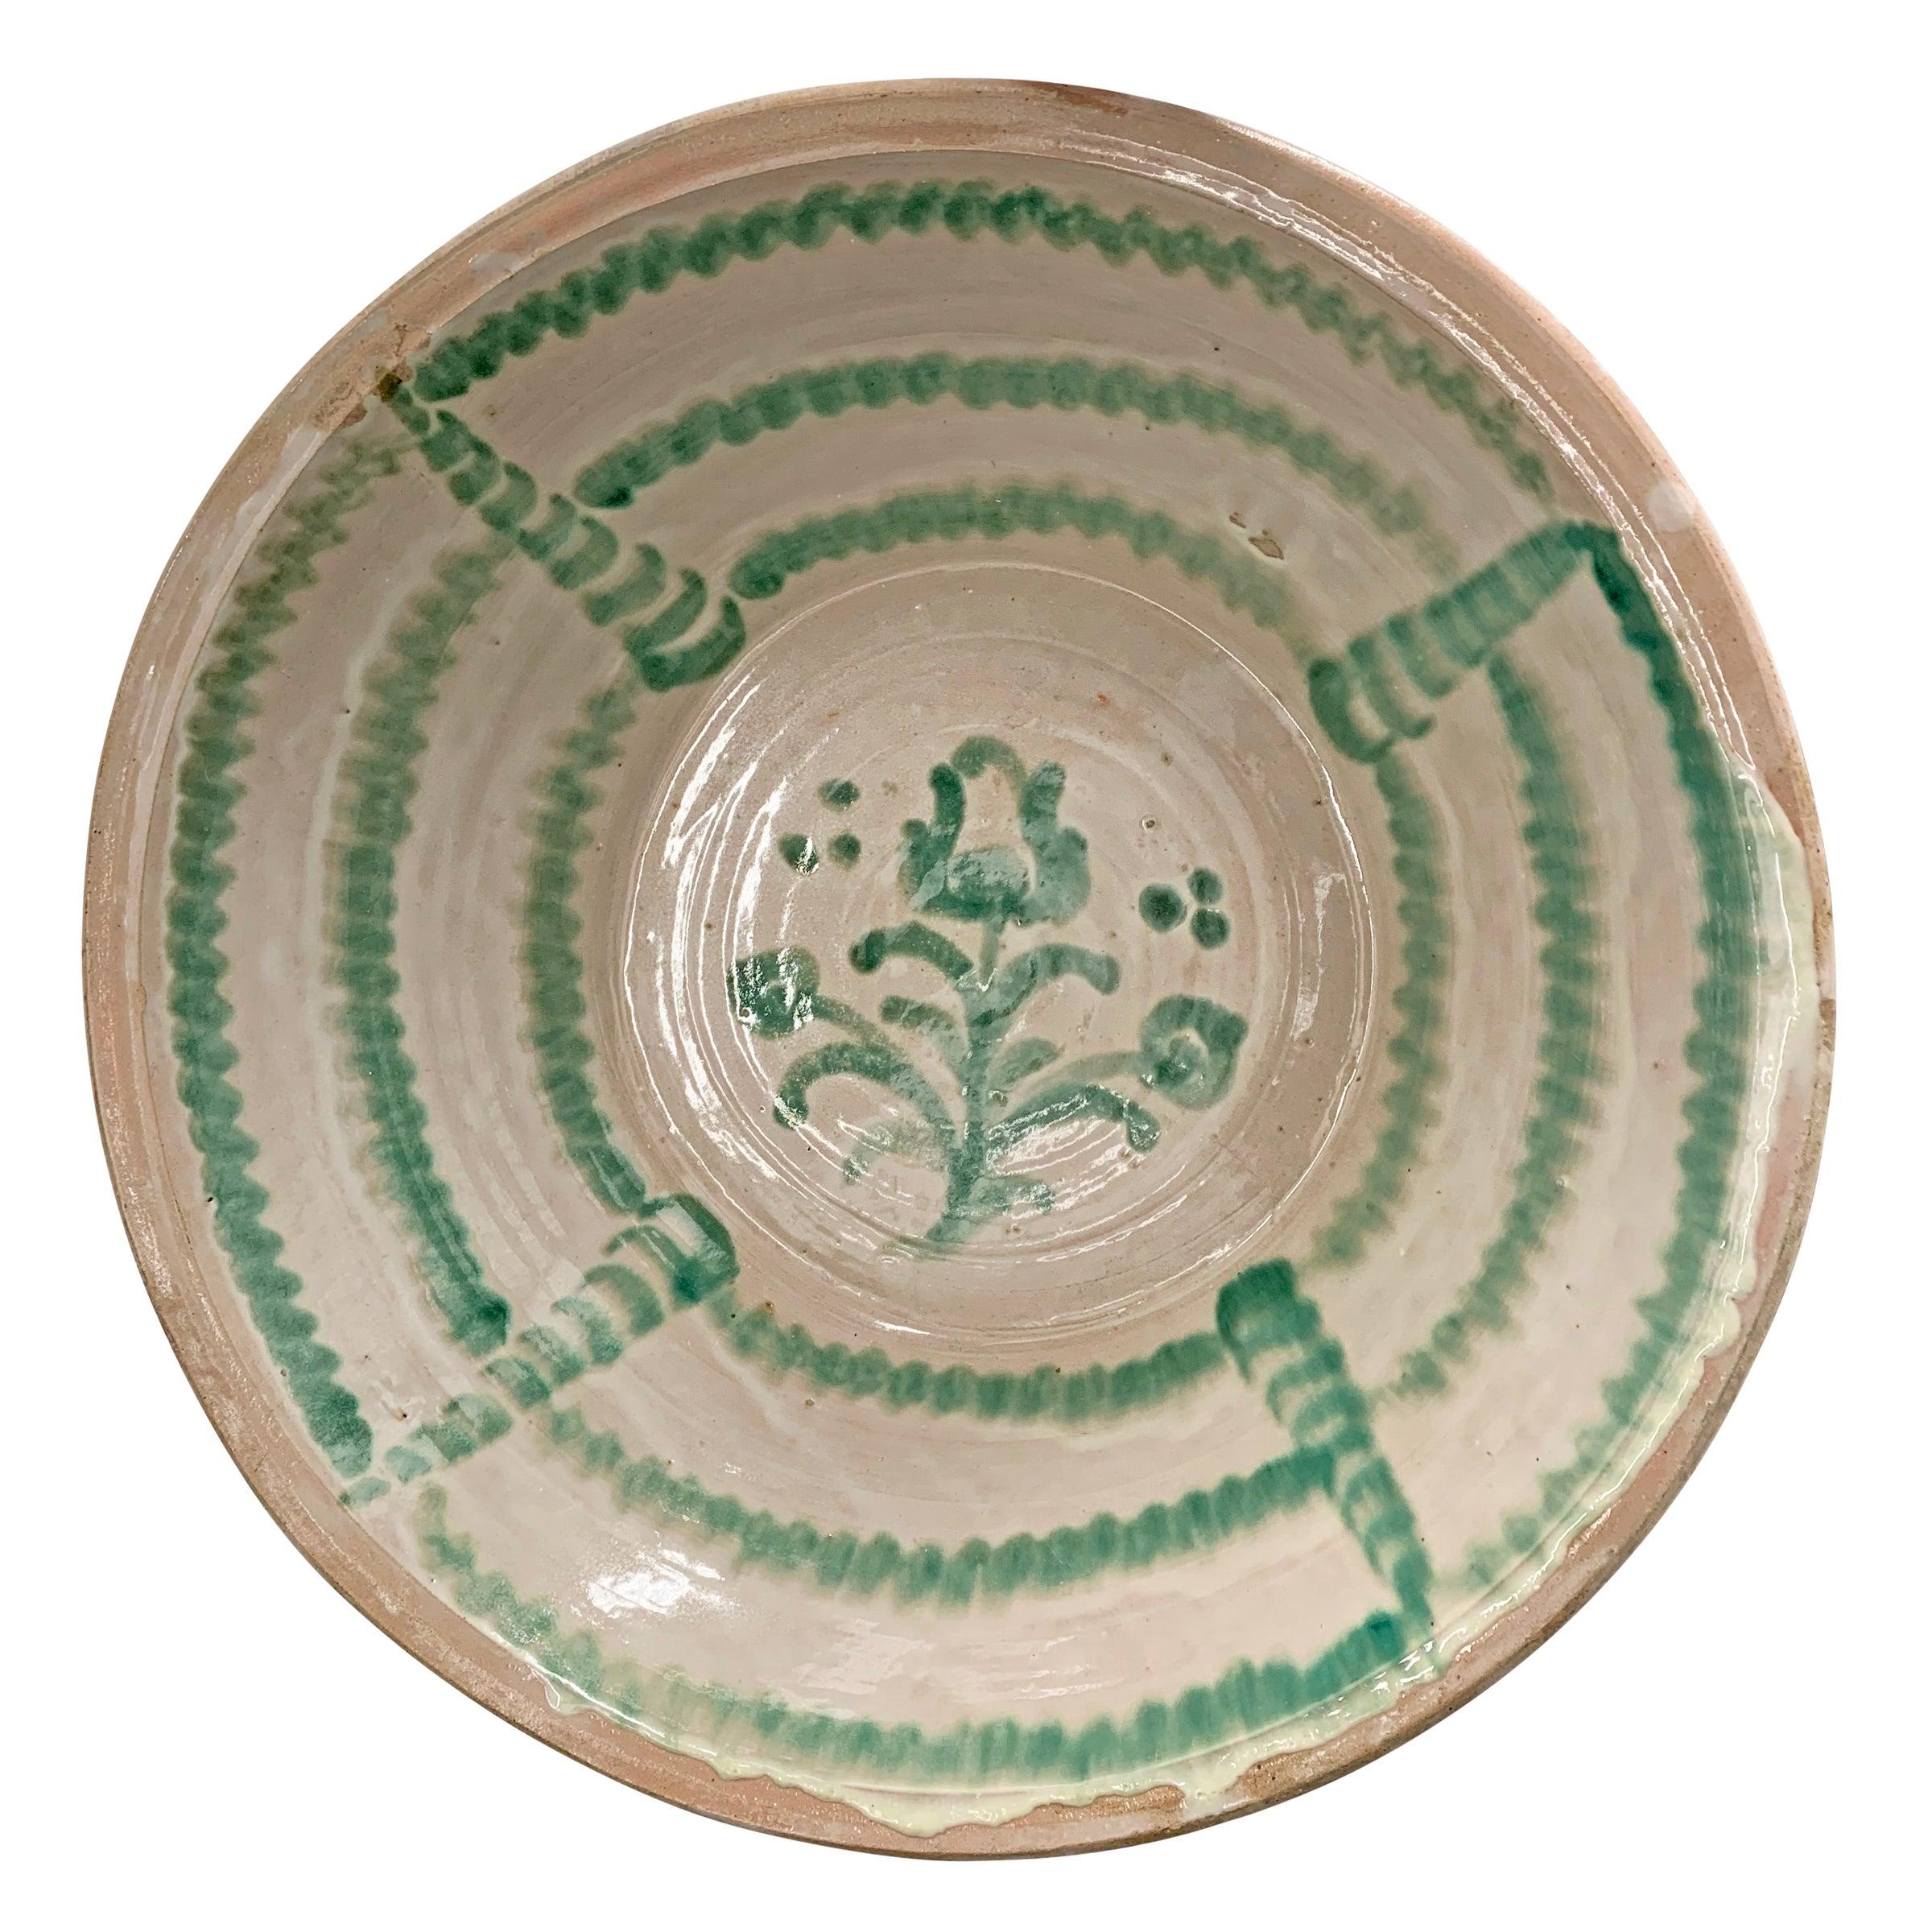 Monumental Andalusian Pottery Bowl